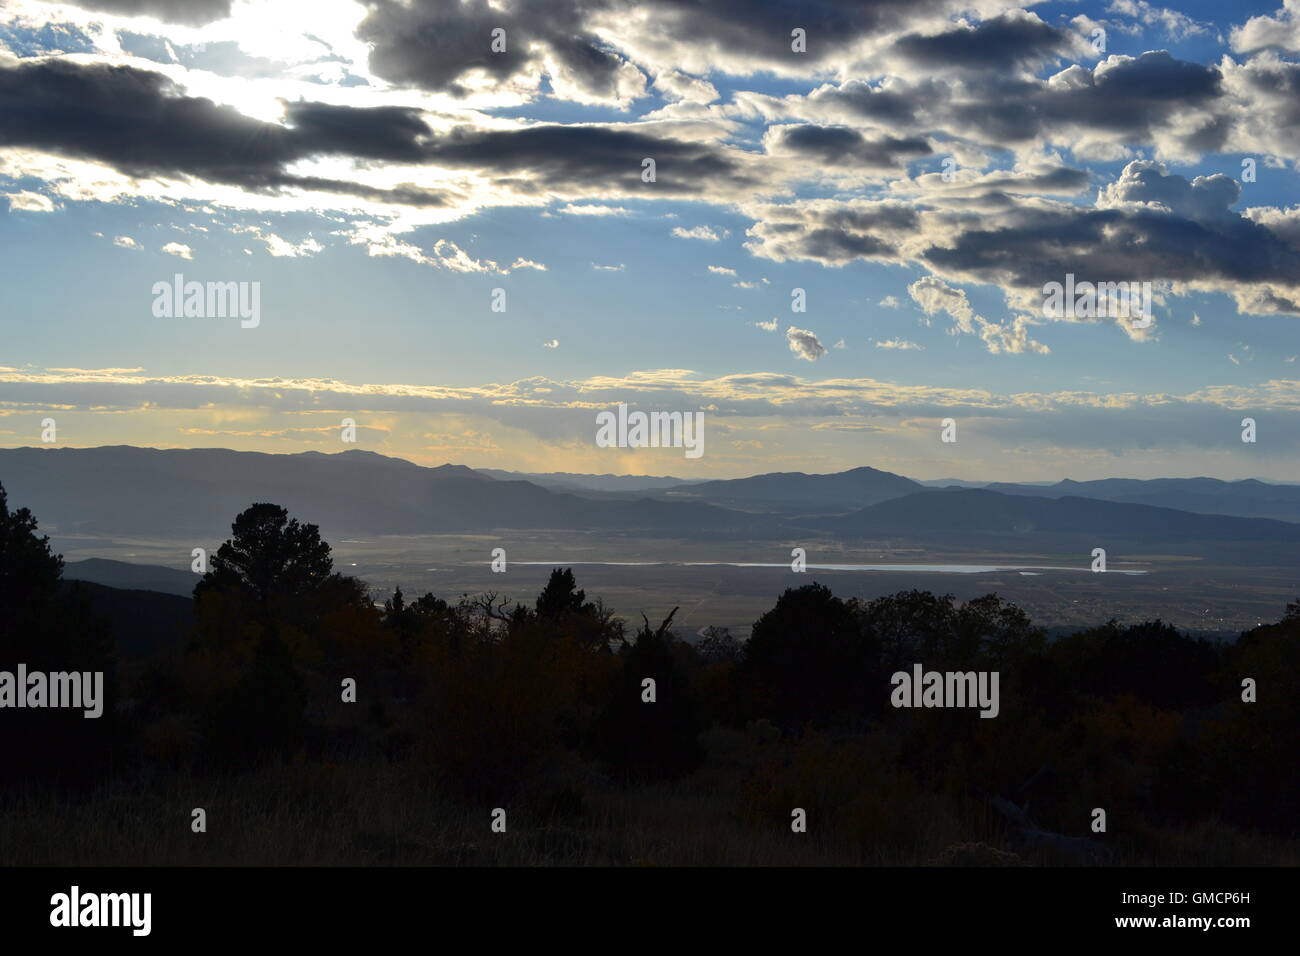 Clouds on the mountain range, Stock Photo